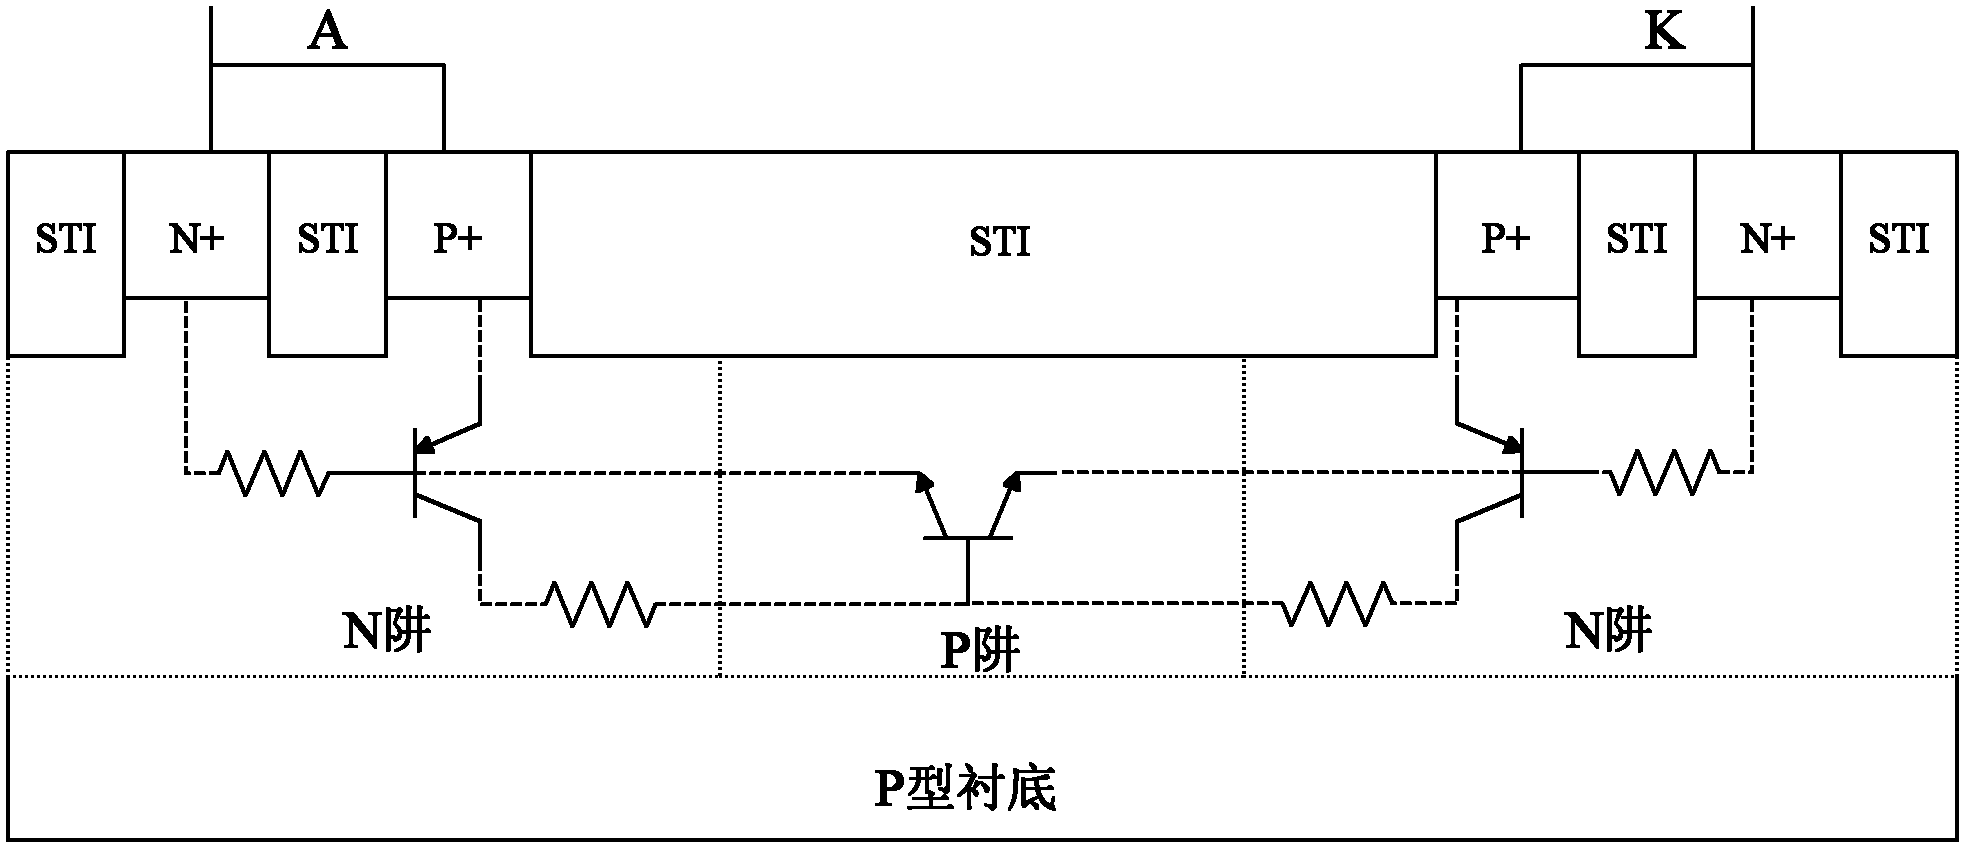 Bidirectional triode thyristor based on diode auxiliary triggering